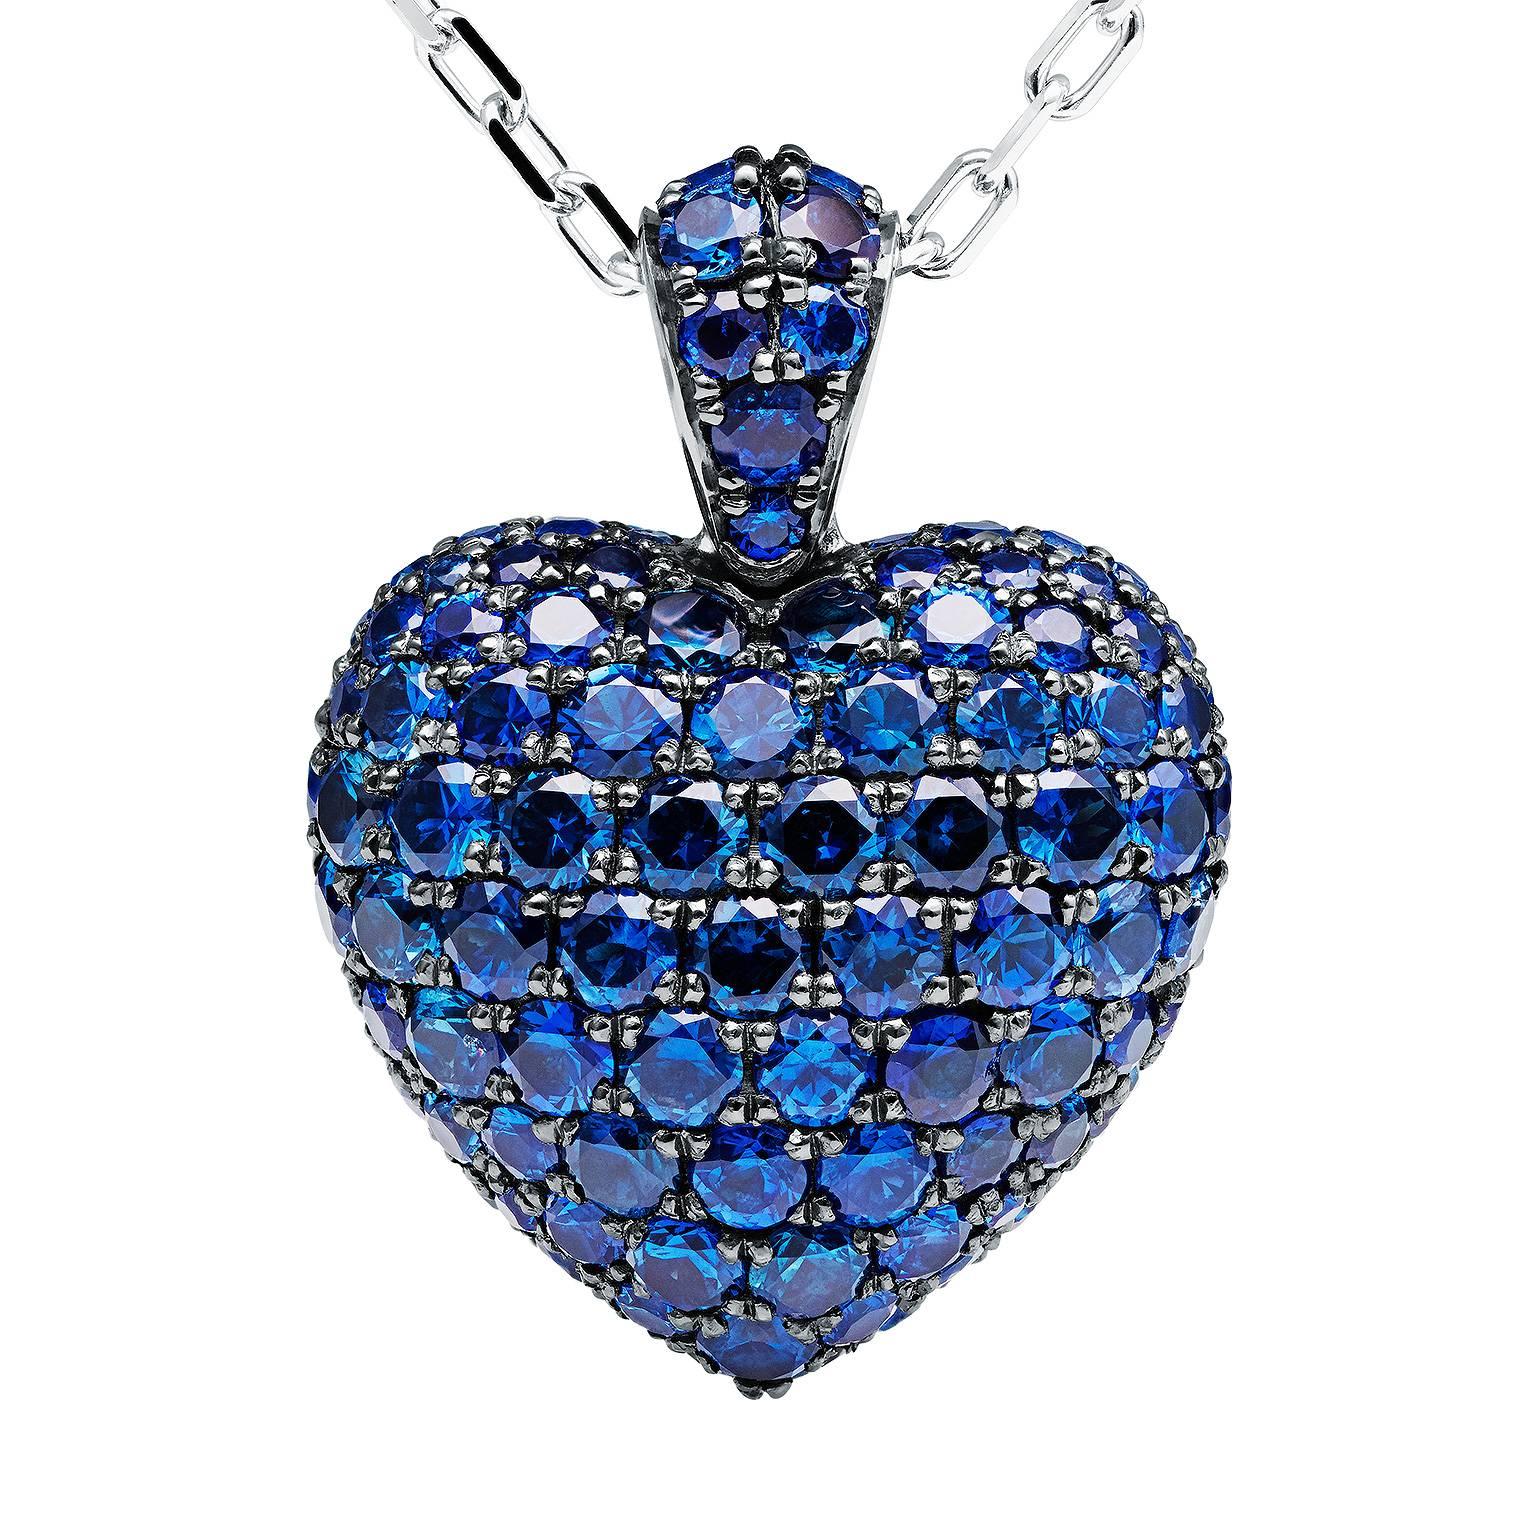 This lovely cornflower blue sapphire heart pendant designed by Towe Norlen in 2009, is shaped as a perfectly curved heart with a prominently rounded body. 179 sapphires, hand picked for their matching beautiful blue colour and perfect quality, are